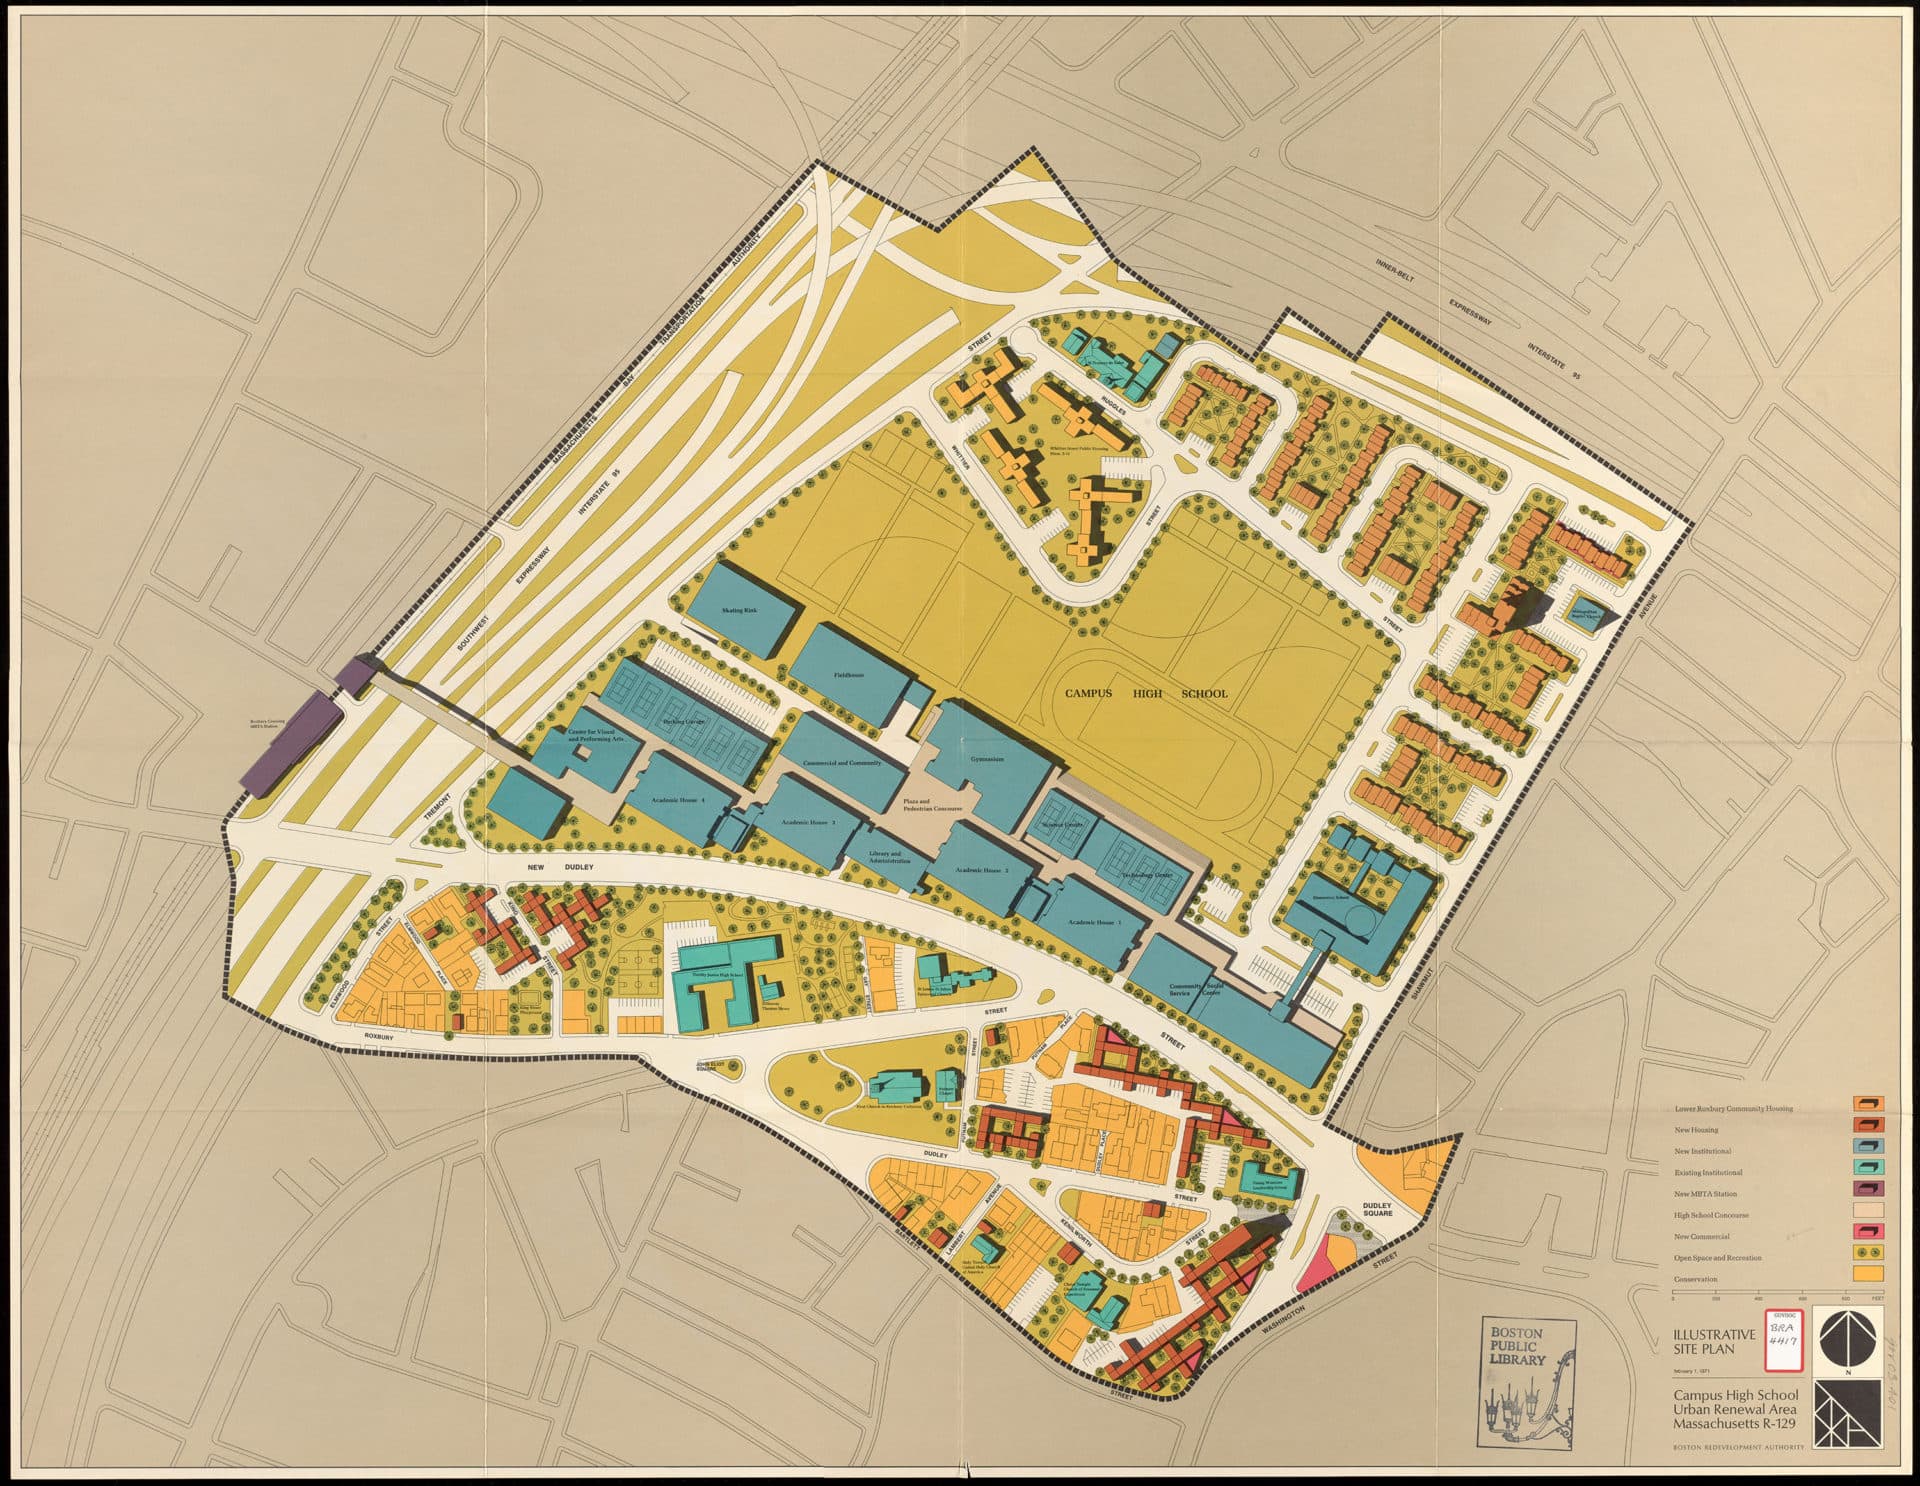 A map shows the city's redevelopment plan, which was never fully realized (Courtesy Norman B. Leventhal Map &amp; Education Center at the Boston Public Library)